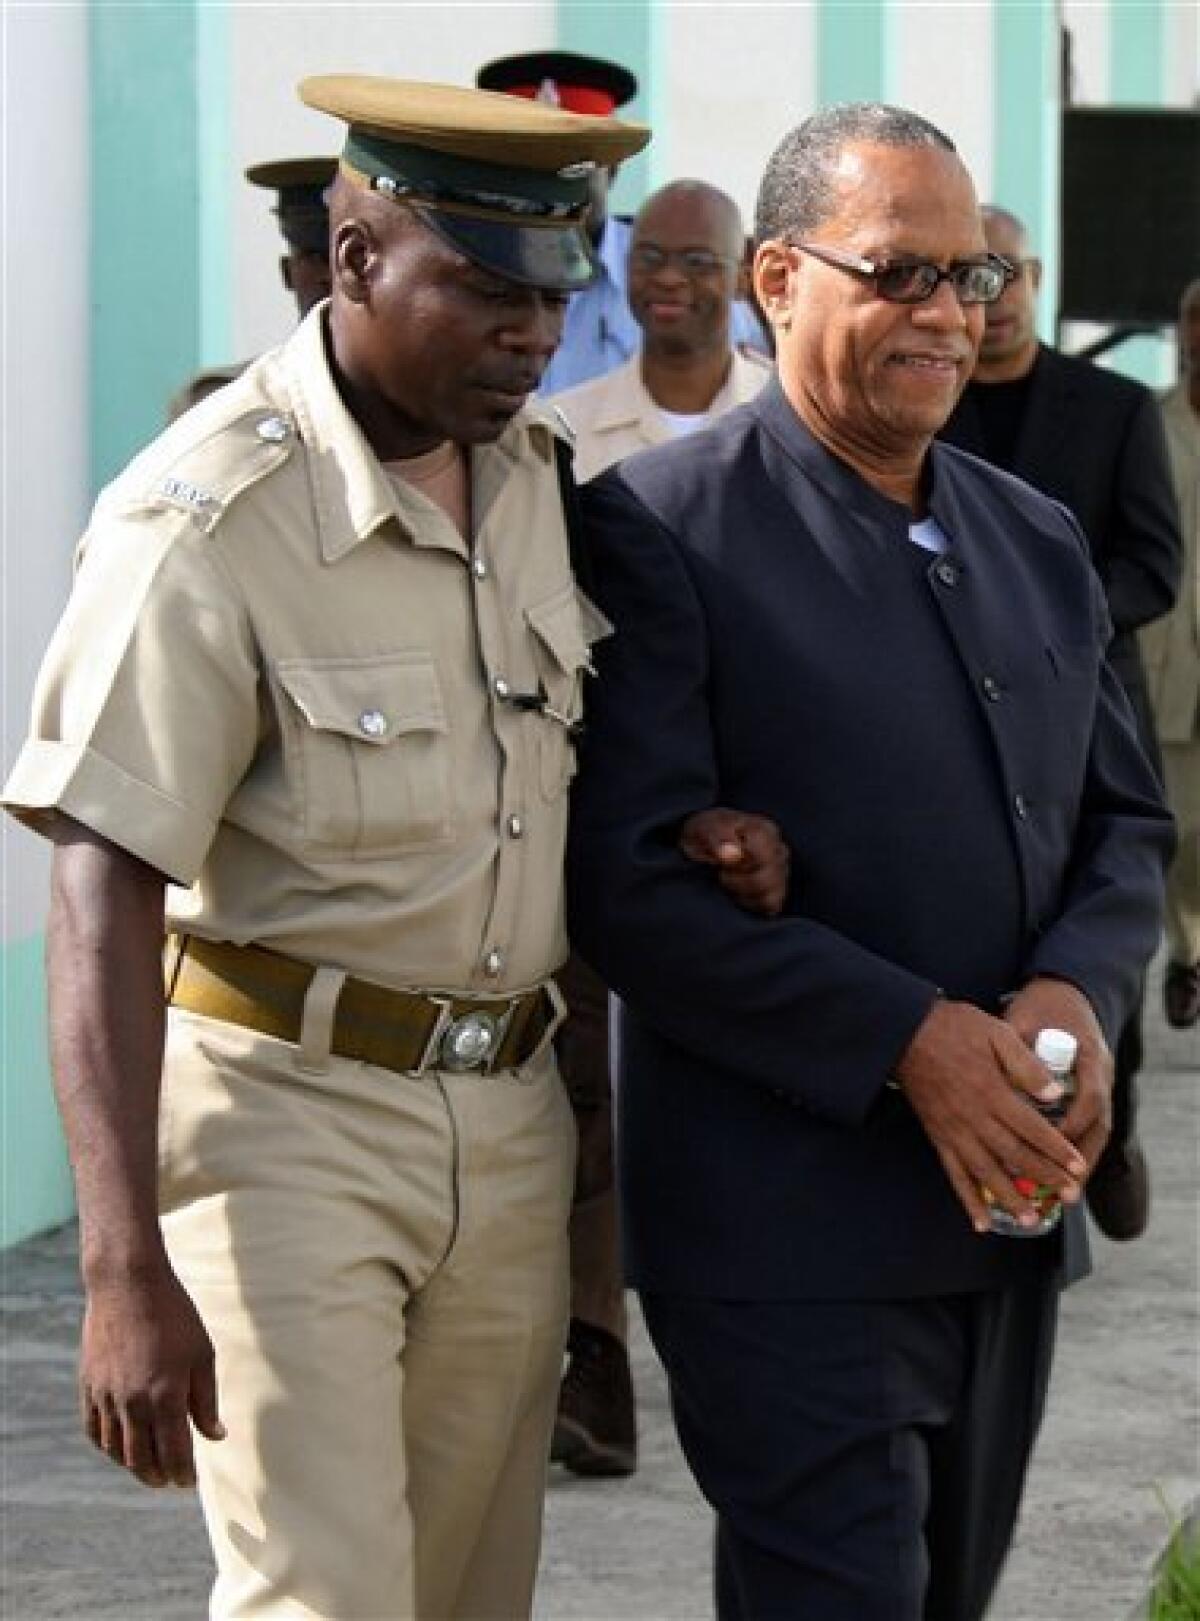 FILE - In this Monday, June 18, 2007 file photo, Grenada's former Deputy Prime Minister, Bernard Coard, right, is escorted by a prison guard upon his arrival to the Grenada Supreme Court for a re-sentencing hearing in St. George's, Grenada. Former Deputy Prime Minister Bernard Coard and six other men convicted of killing Grenada's leader in the 1983 coup that triggered a U.S. invasion strode out of prison on Saturday, Sept. 5, 2009, the last of 17 who had been sentenced for the crime. (AP Photo/Harold Quash, file)